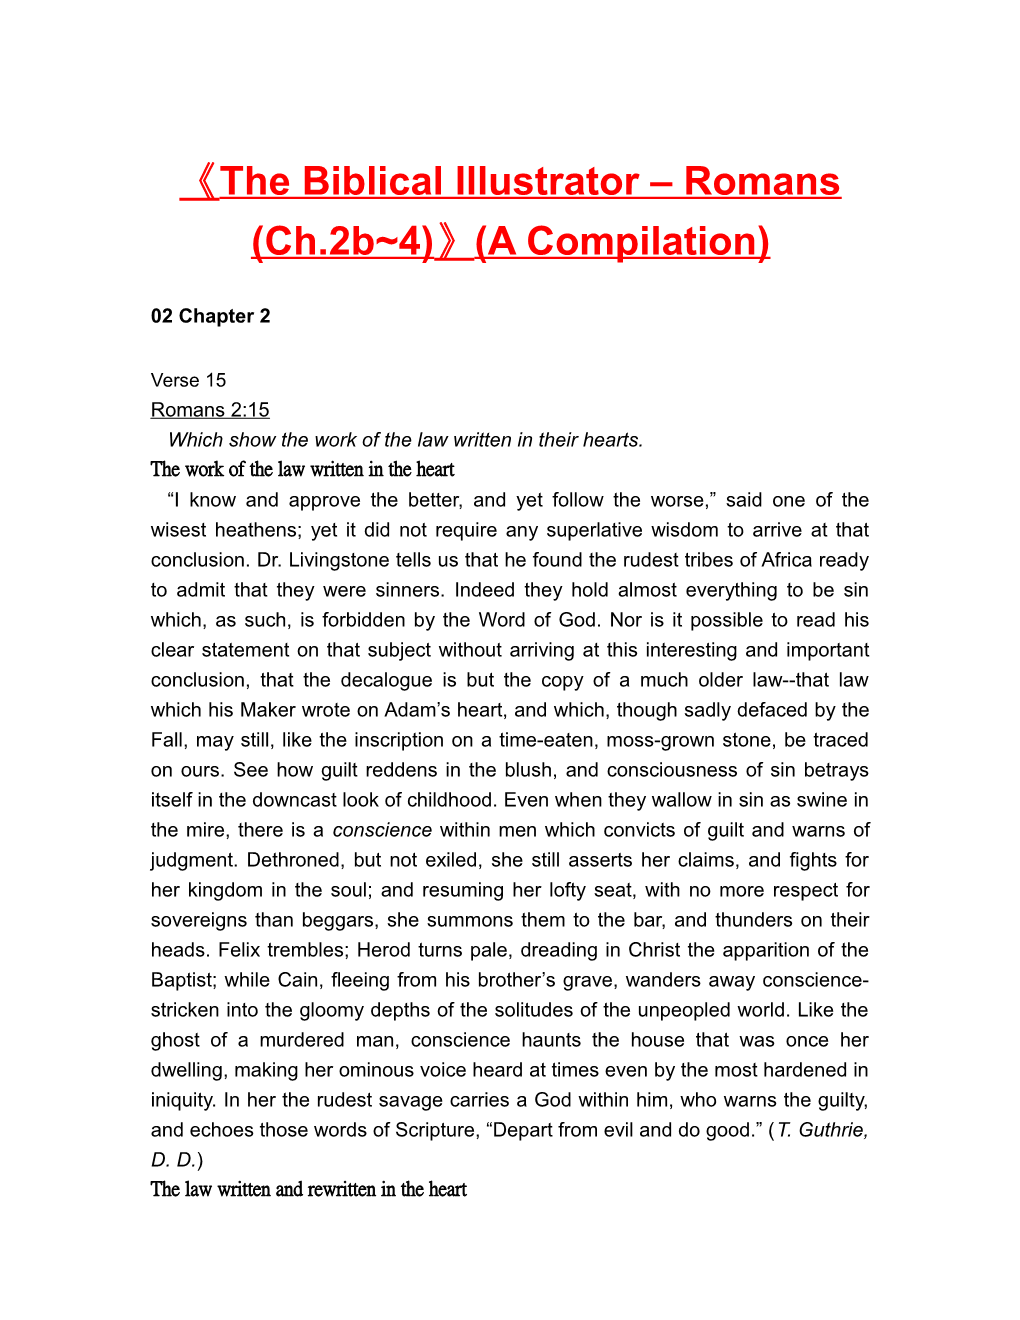 The Biblical Illustrator Romans (Ch.2B 4) (A Compilation)